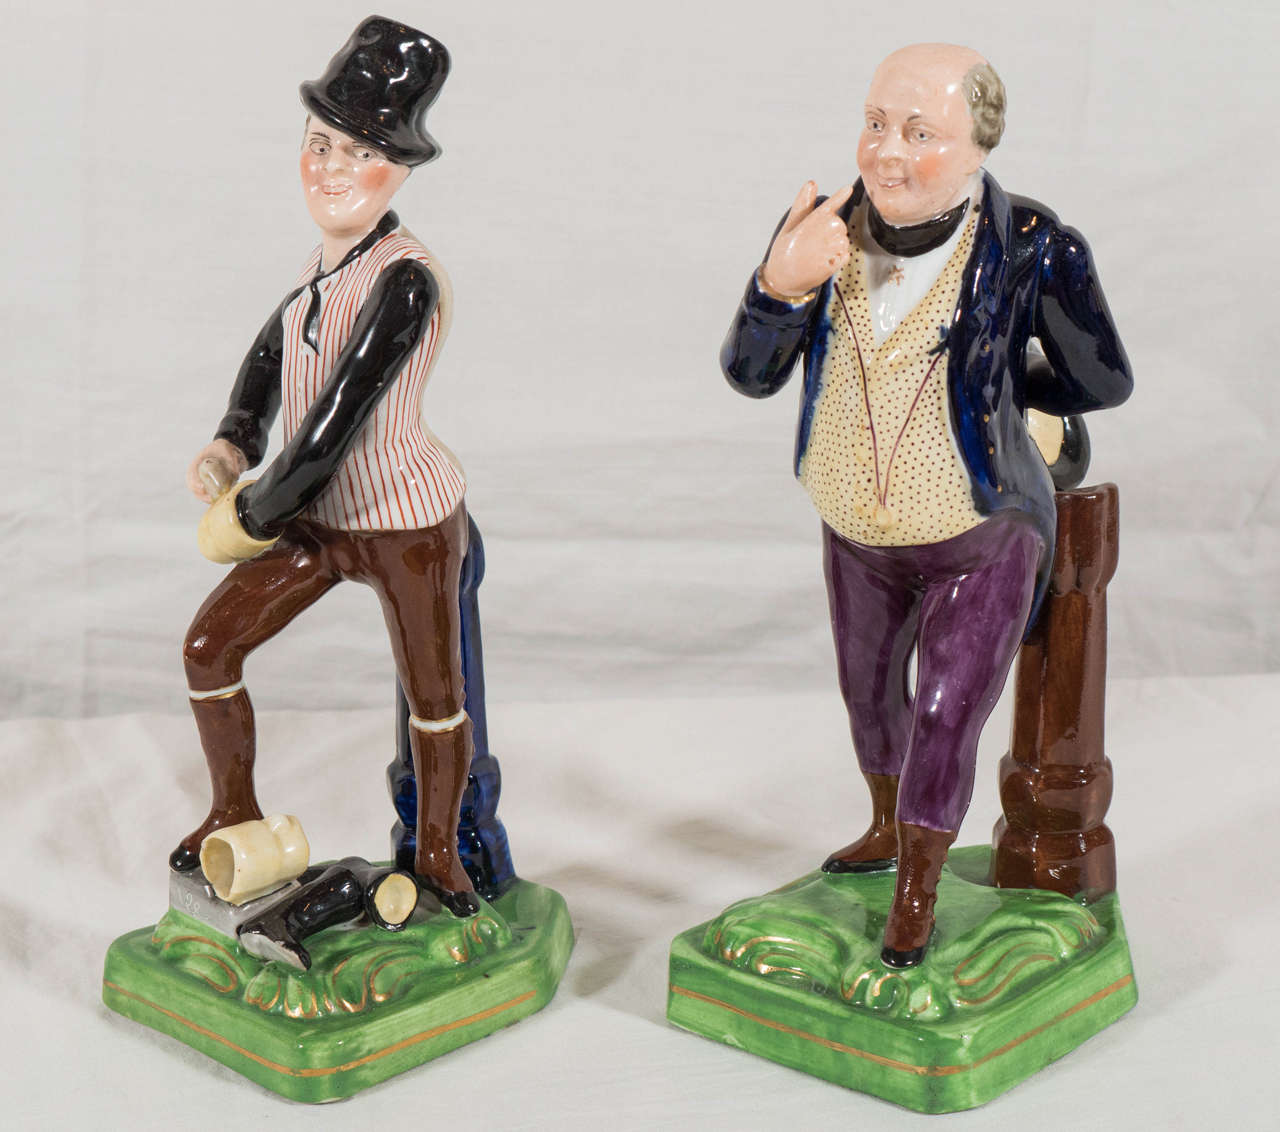 Early Victorian Staffordshire Figures Dickens' Mr Pickwick & Sam Weller the Bootblack circa 1840